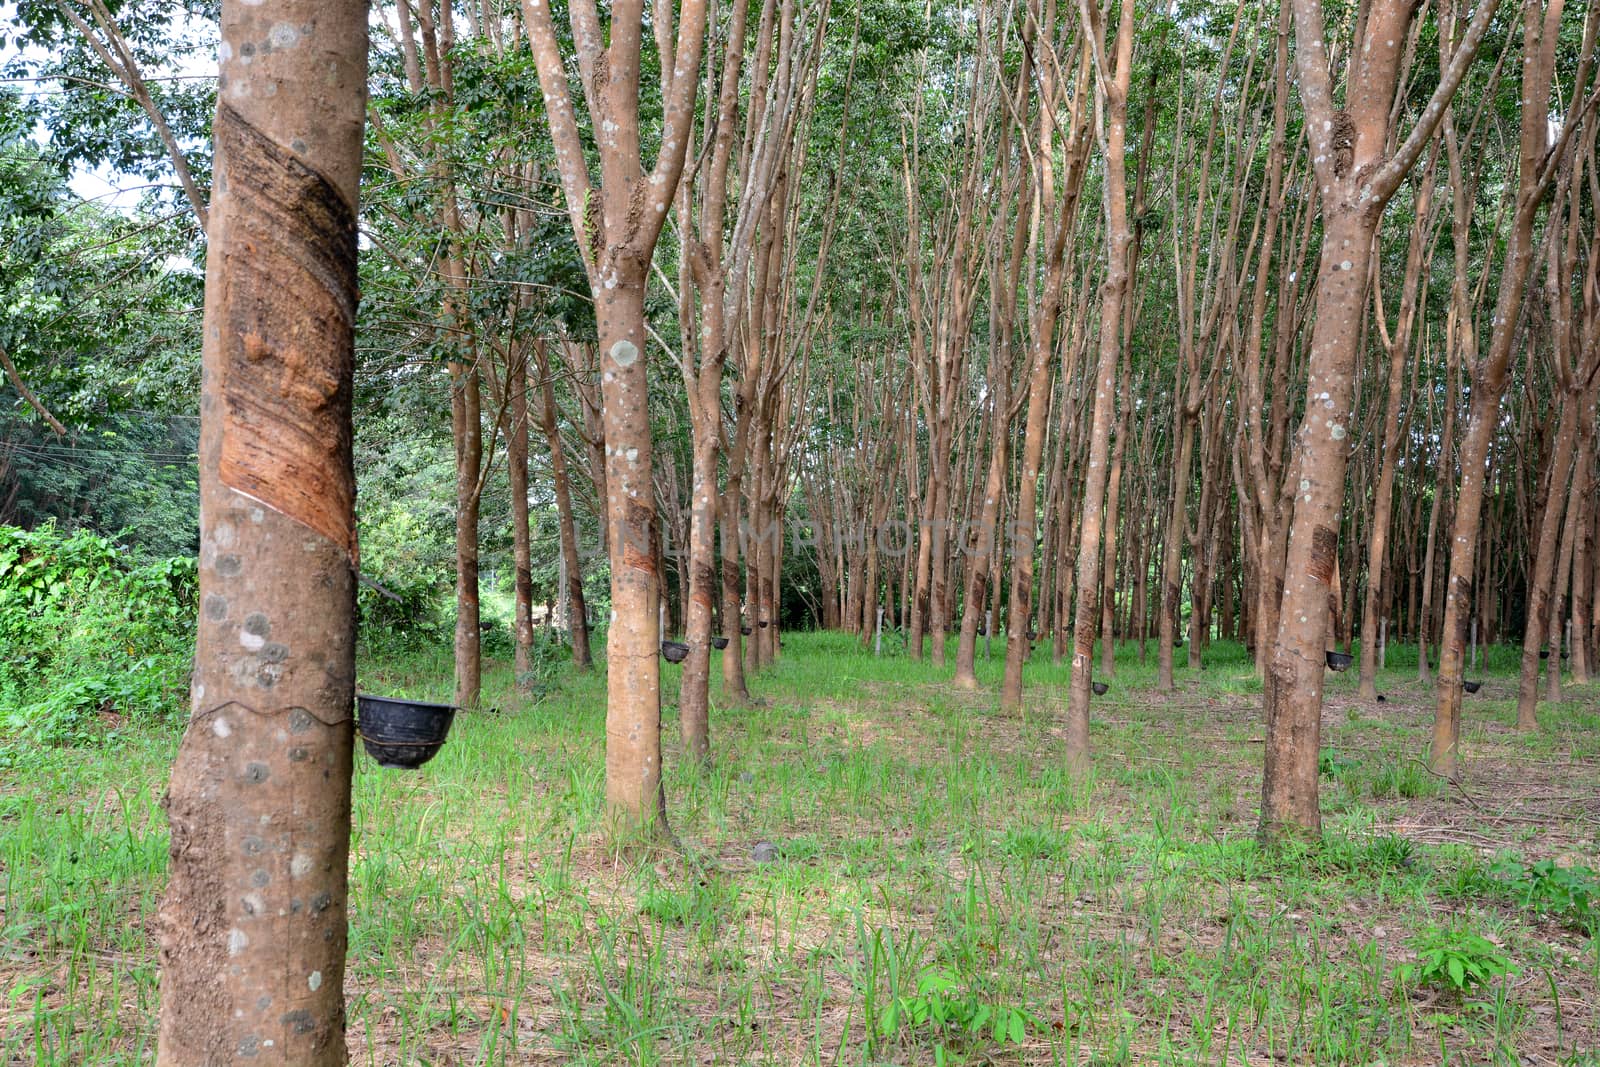 Row of para rubber tree in plantation, Rubber tapping